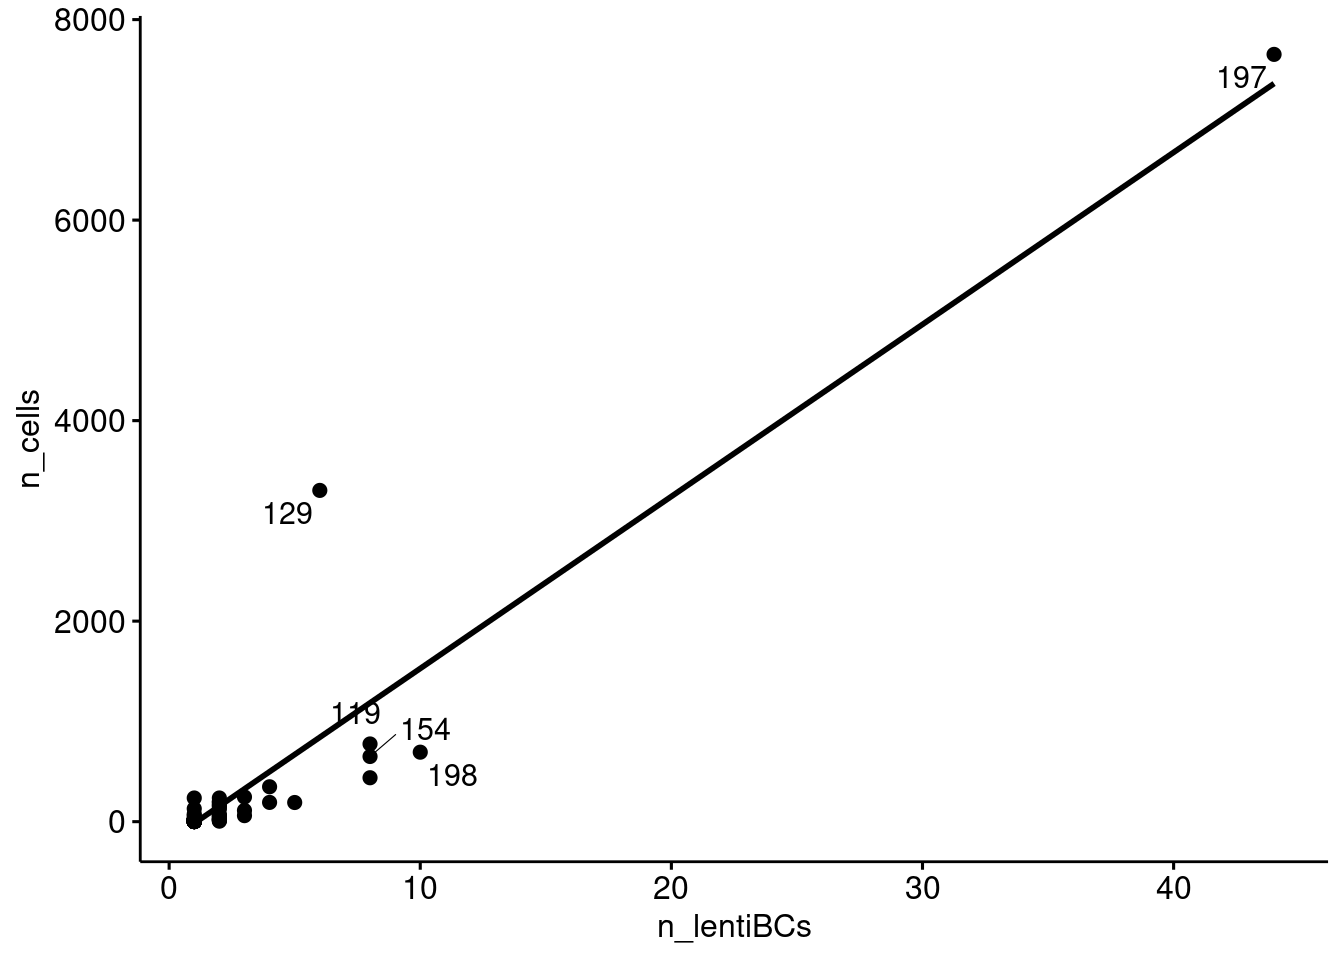 Relationship between the number of cells assigned to a donor and the number of lenti barcodes assigned to a donor.